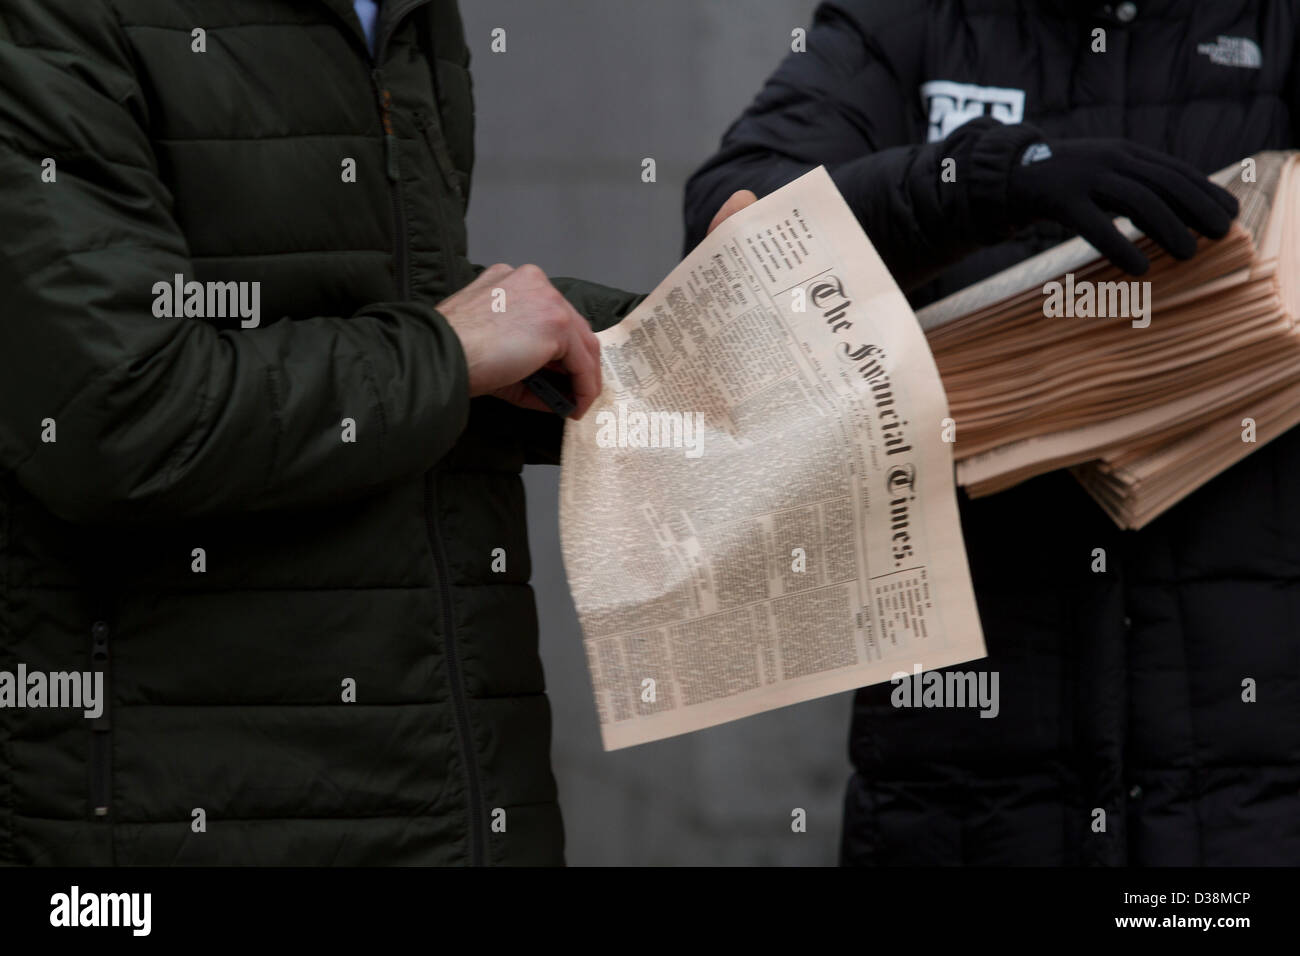 London, UK. 13th February 2013. A Newspaper vendor distributes free copies of the first Financial Times in the city of London financial district. The Financial Times was first published on 13 February 1888 and celebrates its 125th anniversary with a special edition. Amer Ghazzal / Alamy Live News Stock Photo